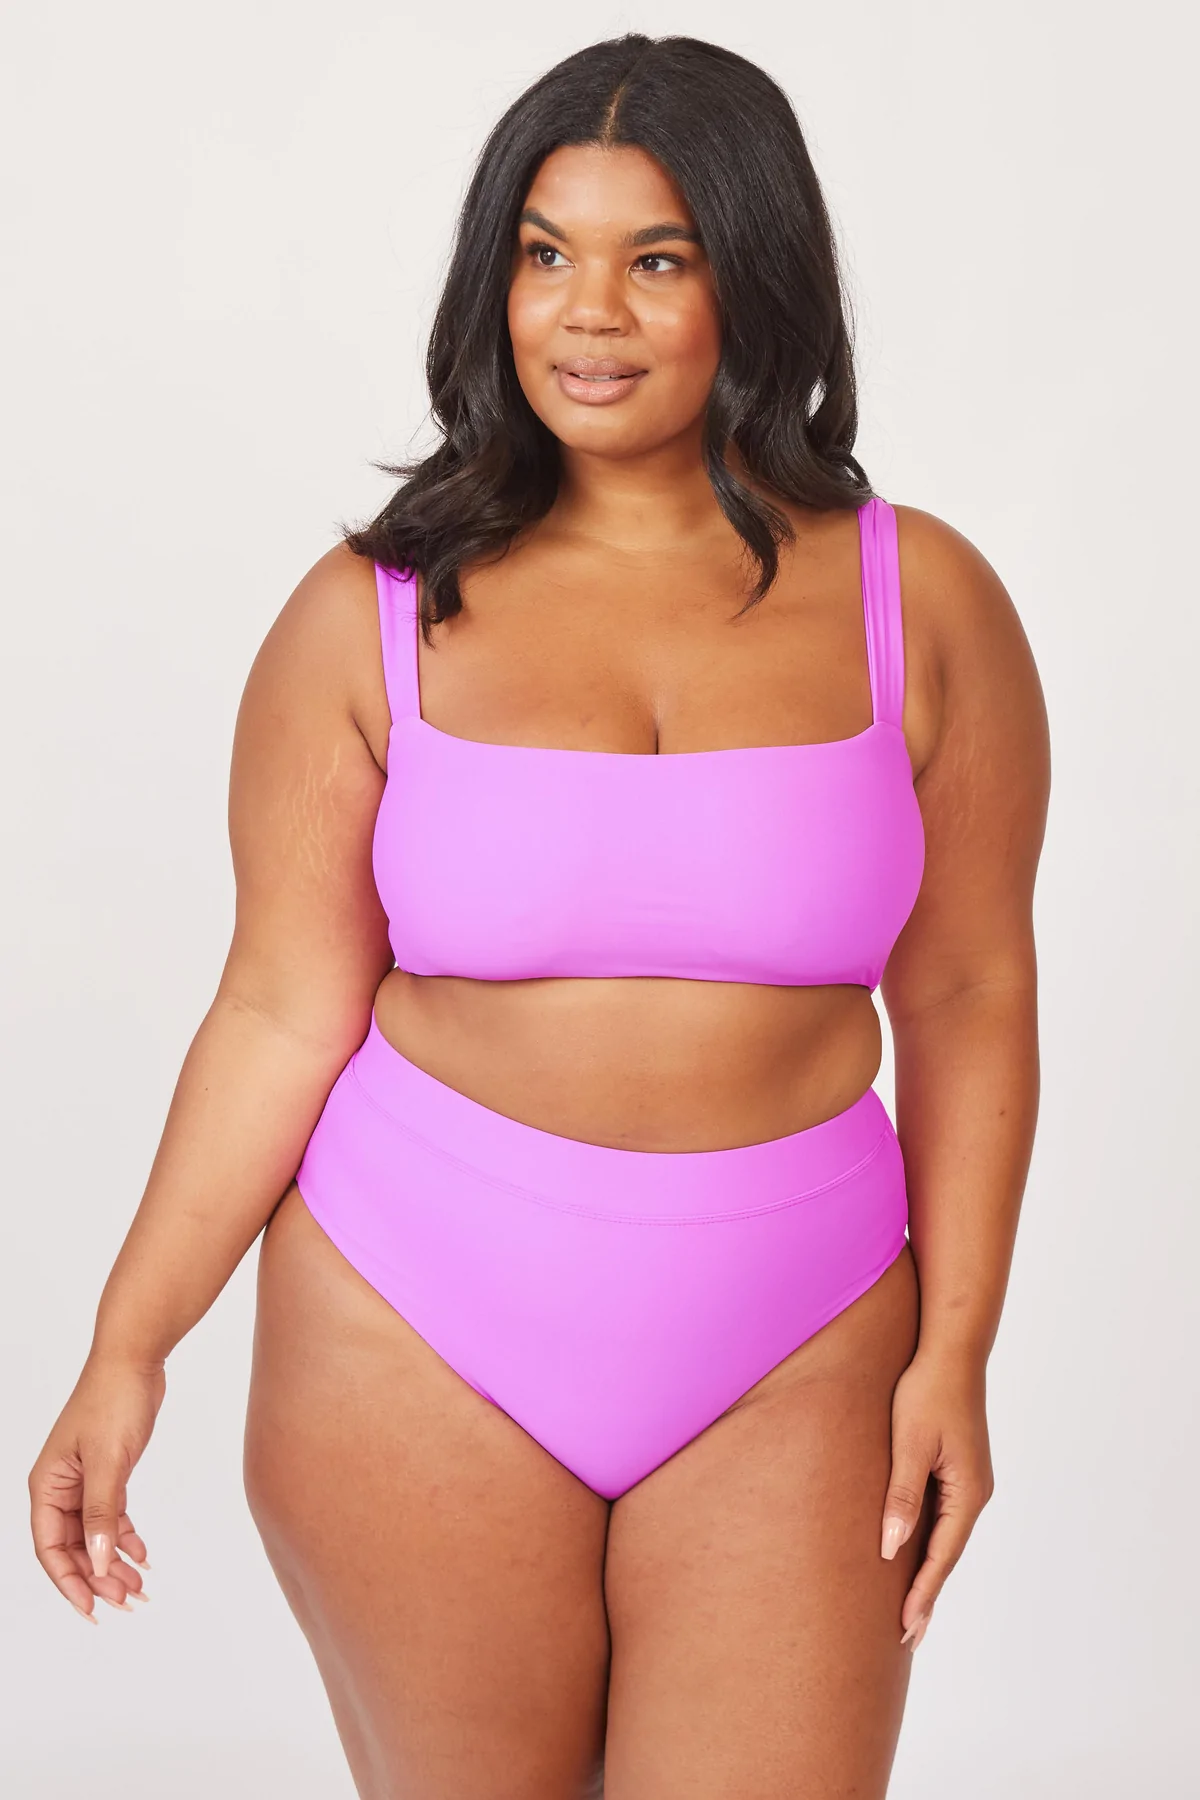 The Best Size Swimwear Brands And Retailers